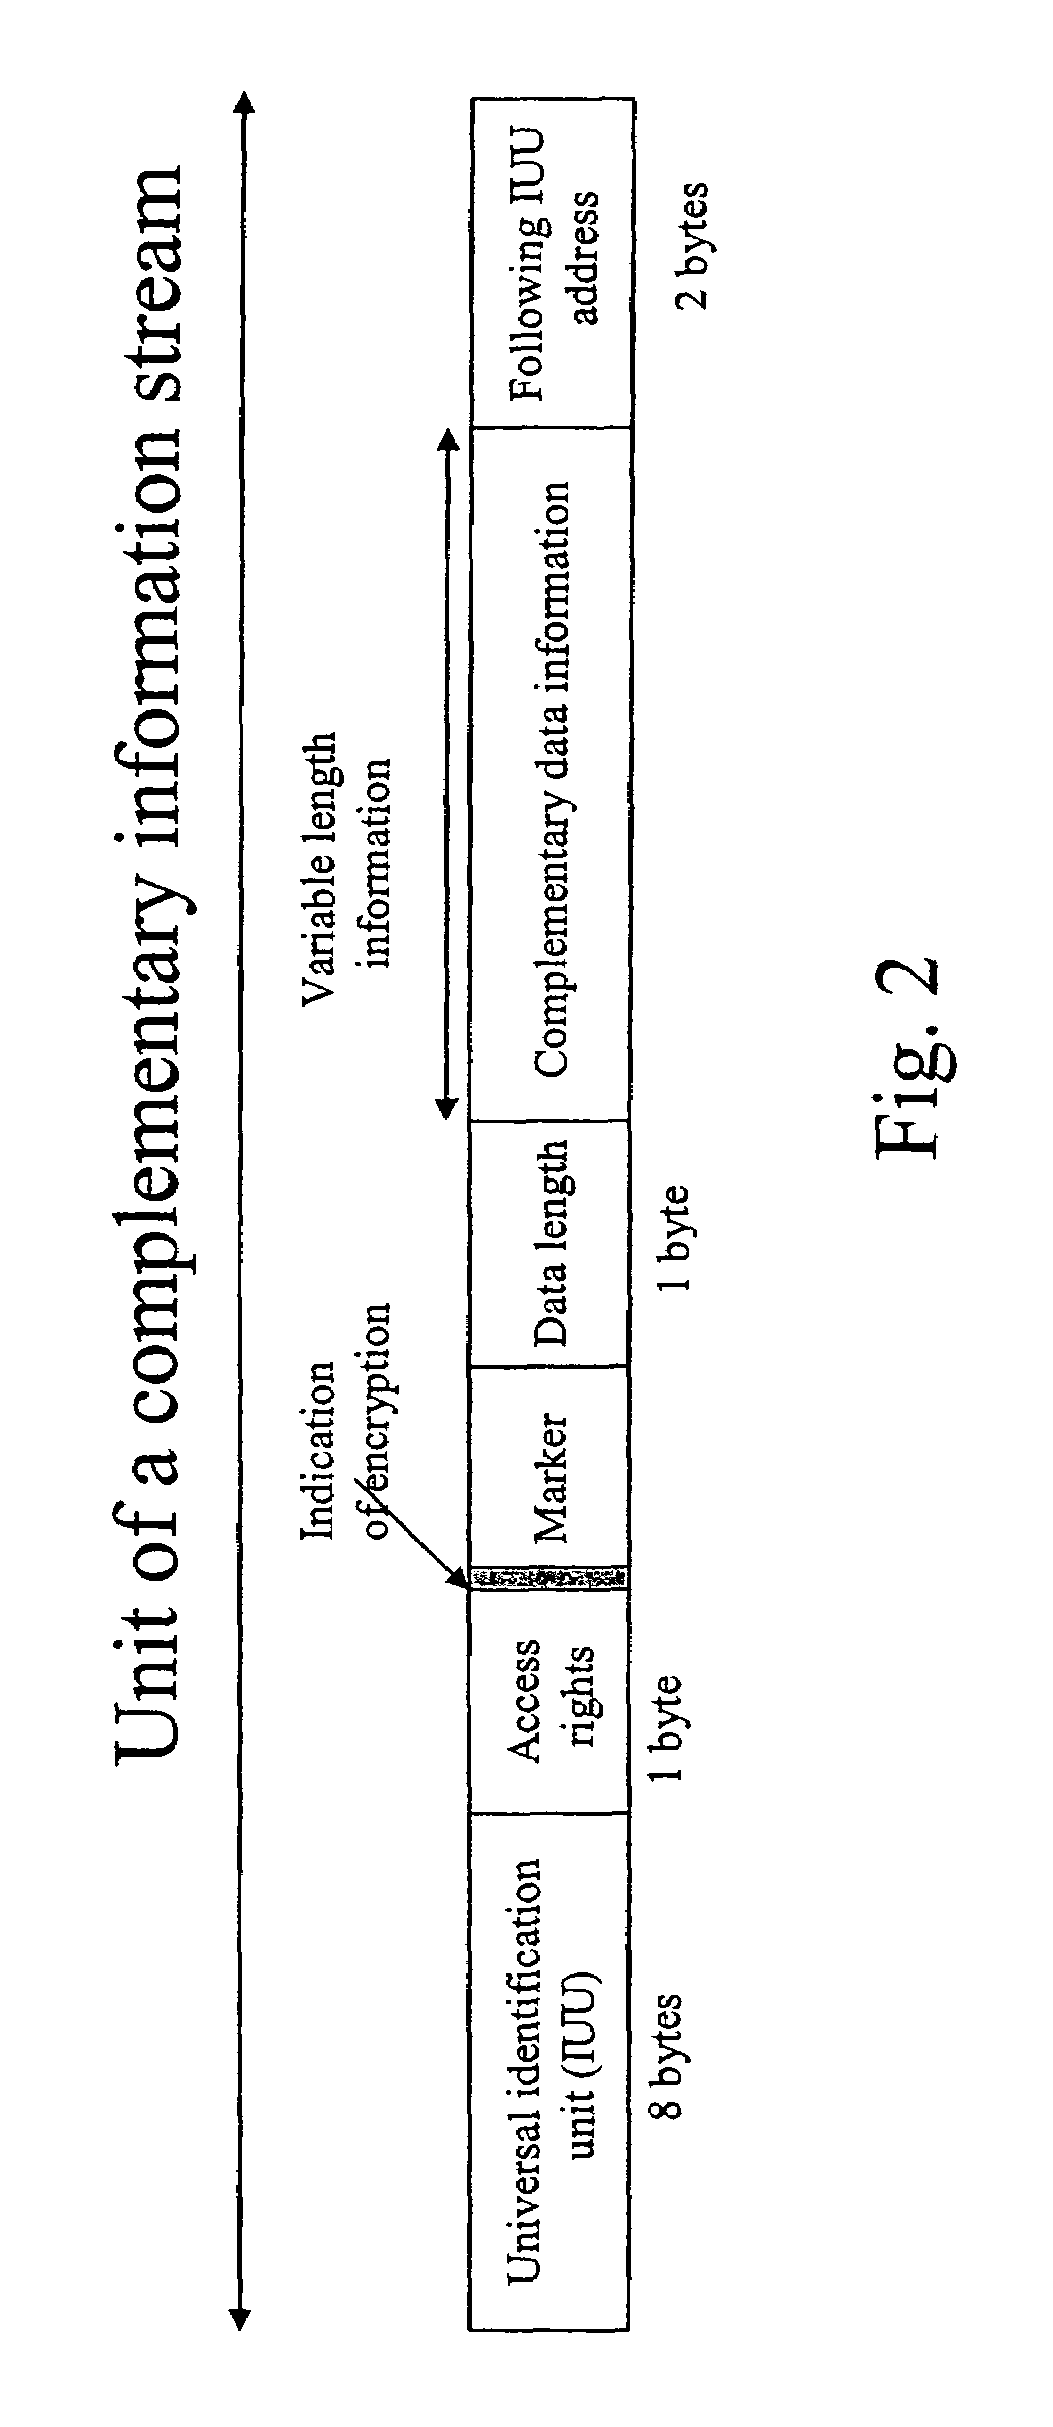 Distributed and secured method and system for protecting and distributing audiovisual flows